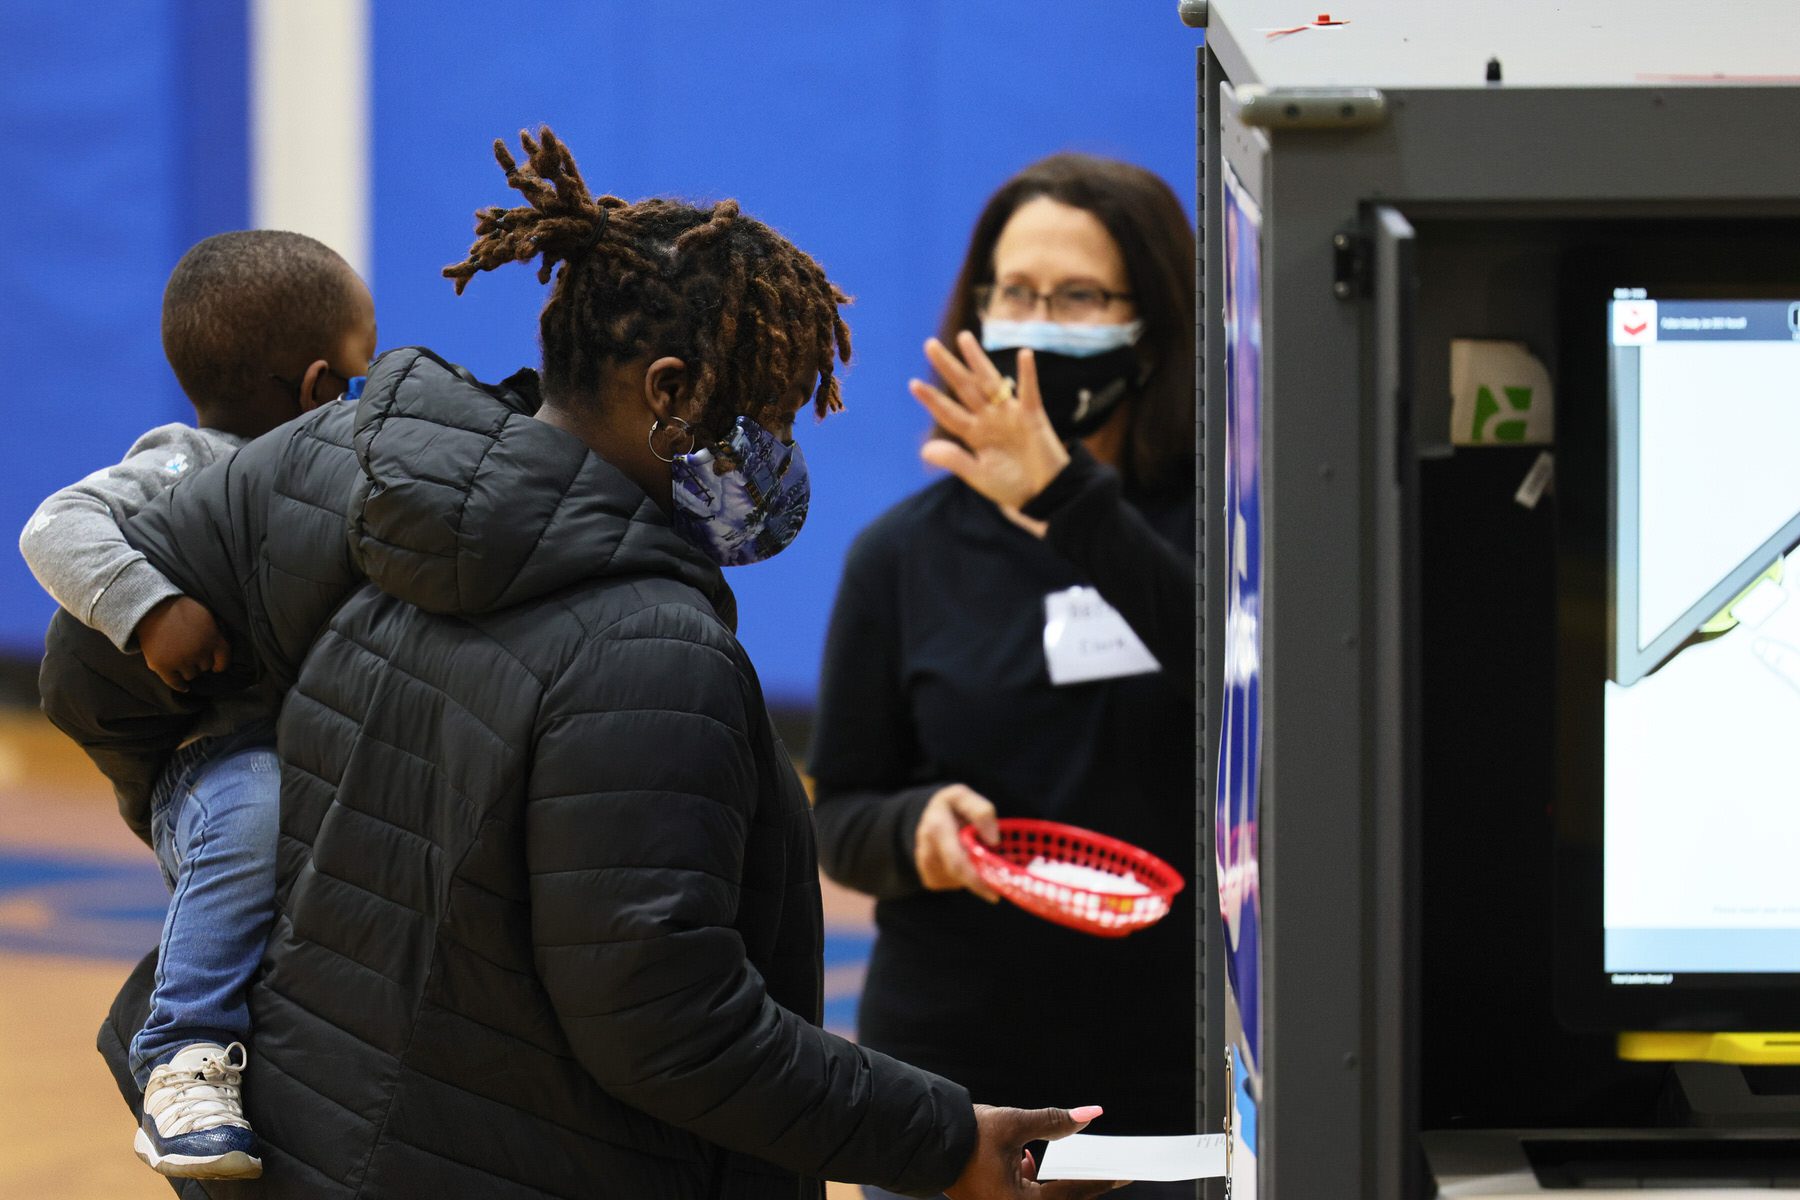 A woman holding a young child casts her vote in the Georgia run-off election at Dunbar Neighborhood Center.